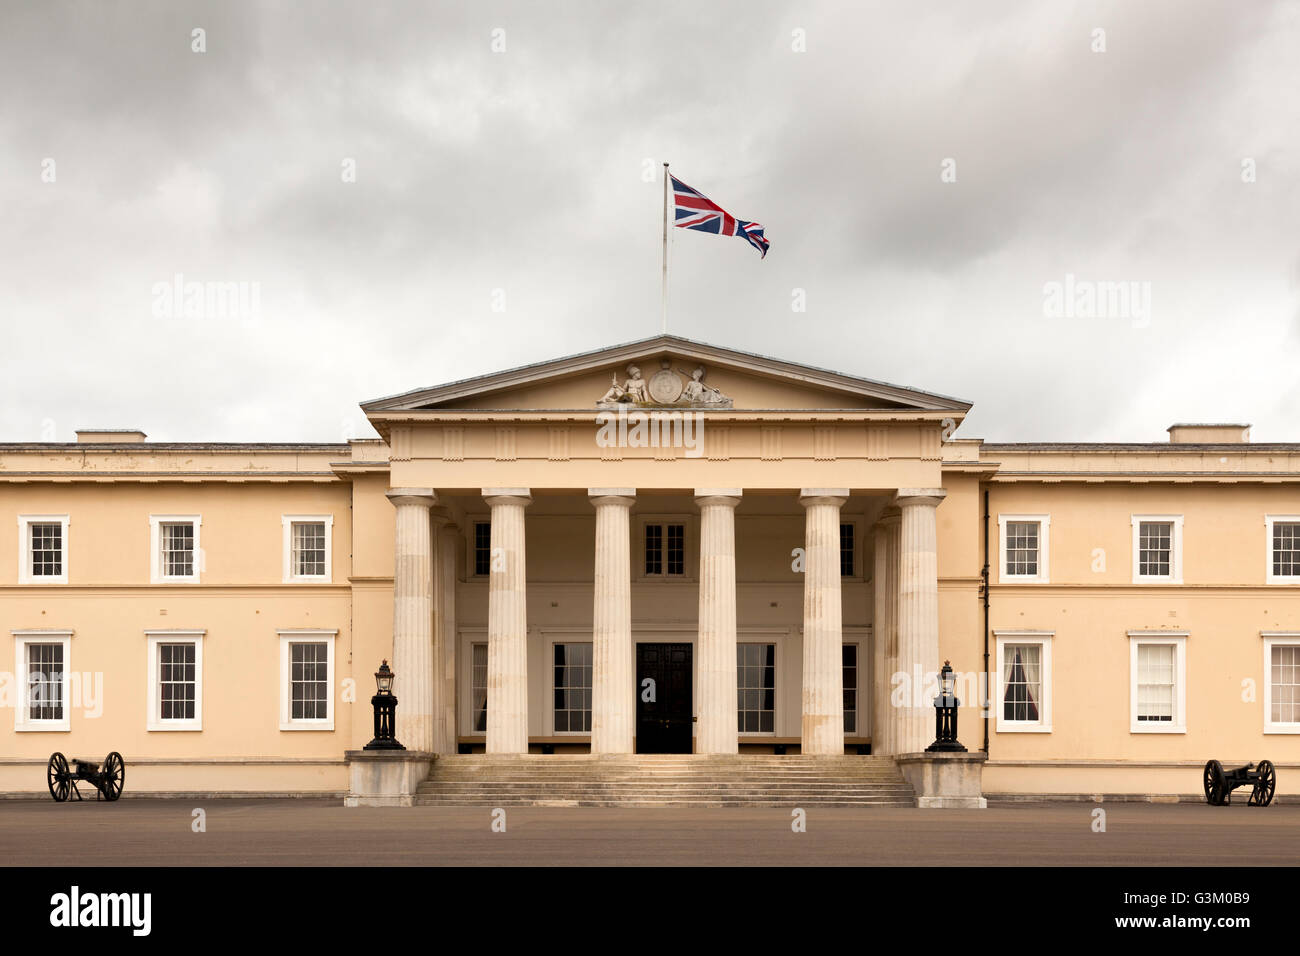 Front facade of Old College building Royal Military Academy Sandhurst, Camberley, Hampshire, England, United Kingdom, Europe Stock Photo